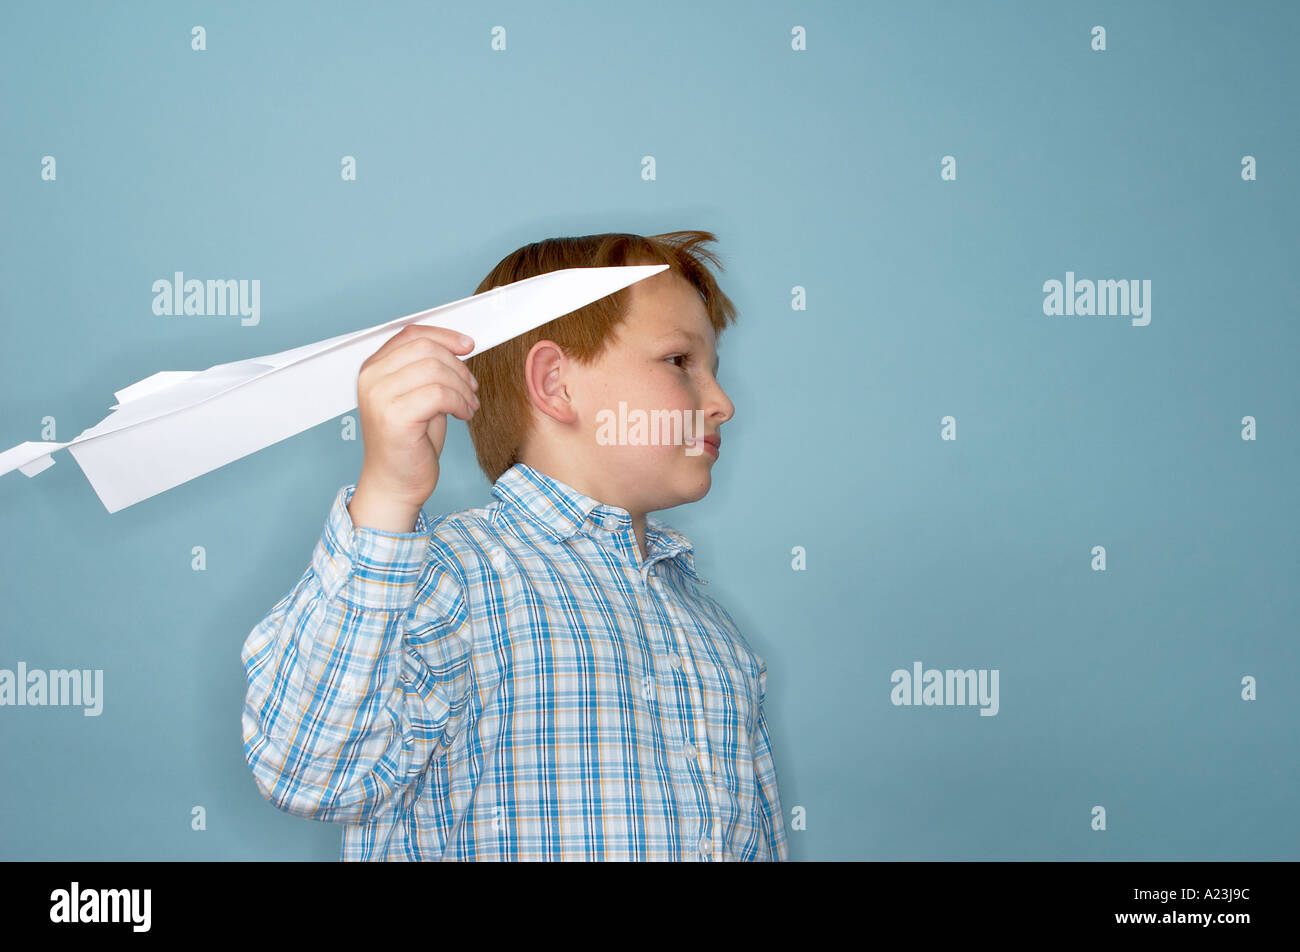 boy playing with paper plane Stock Photo